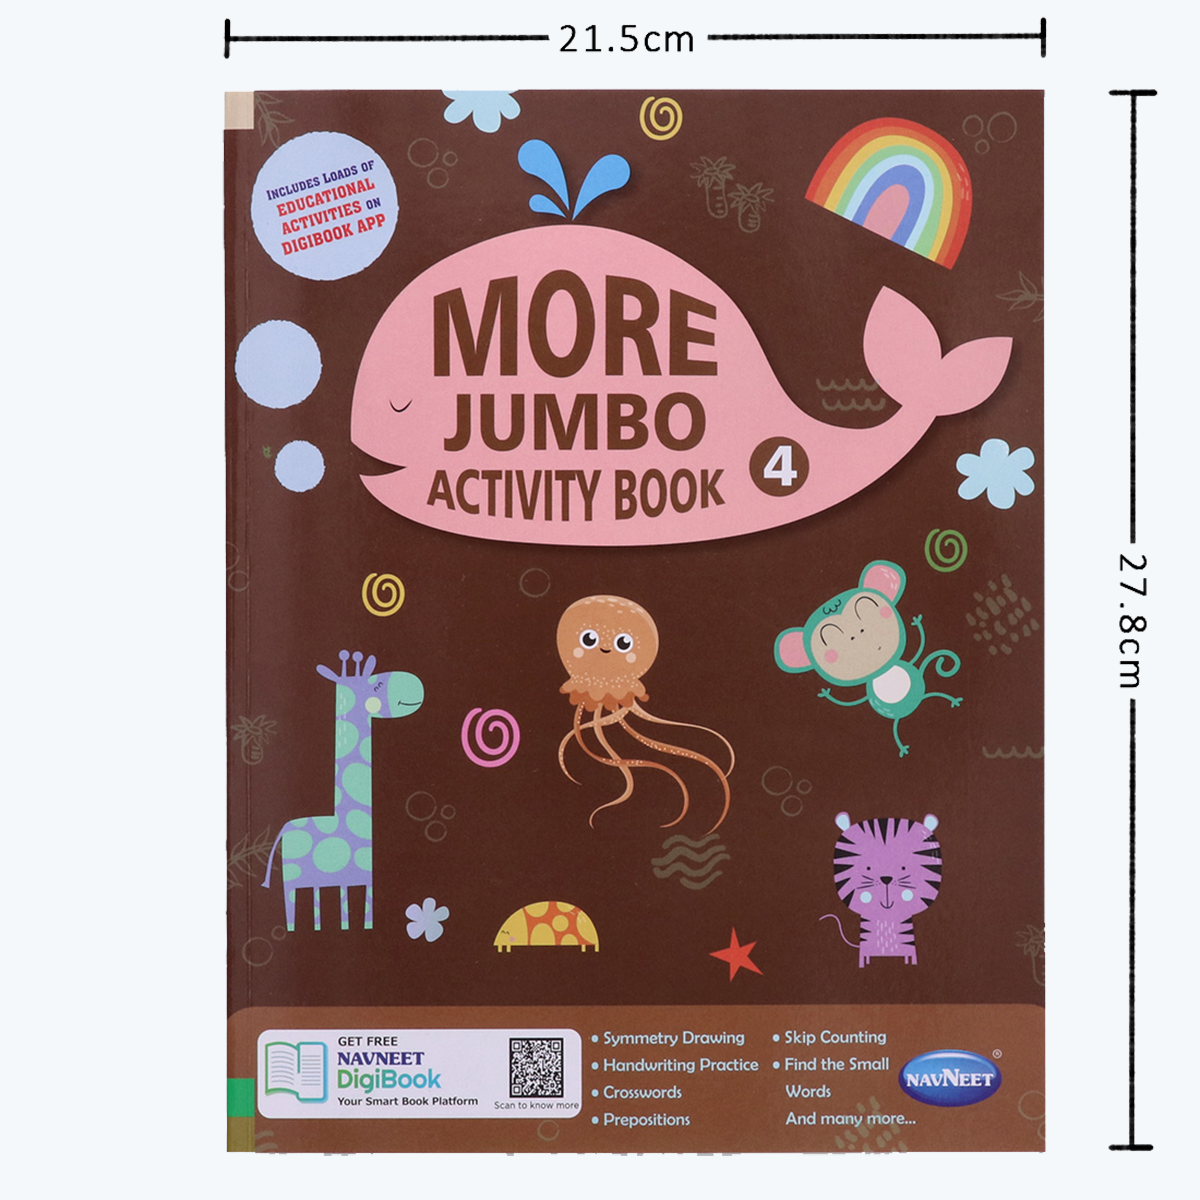 Navneet More Jumbo Activity Book 4- Fun Activities for Kids- Symmetry Drawing, Handwriting Practice, Skip Counting, Crosswords, Preposition, Find the Small Words